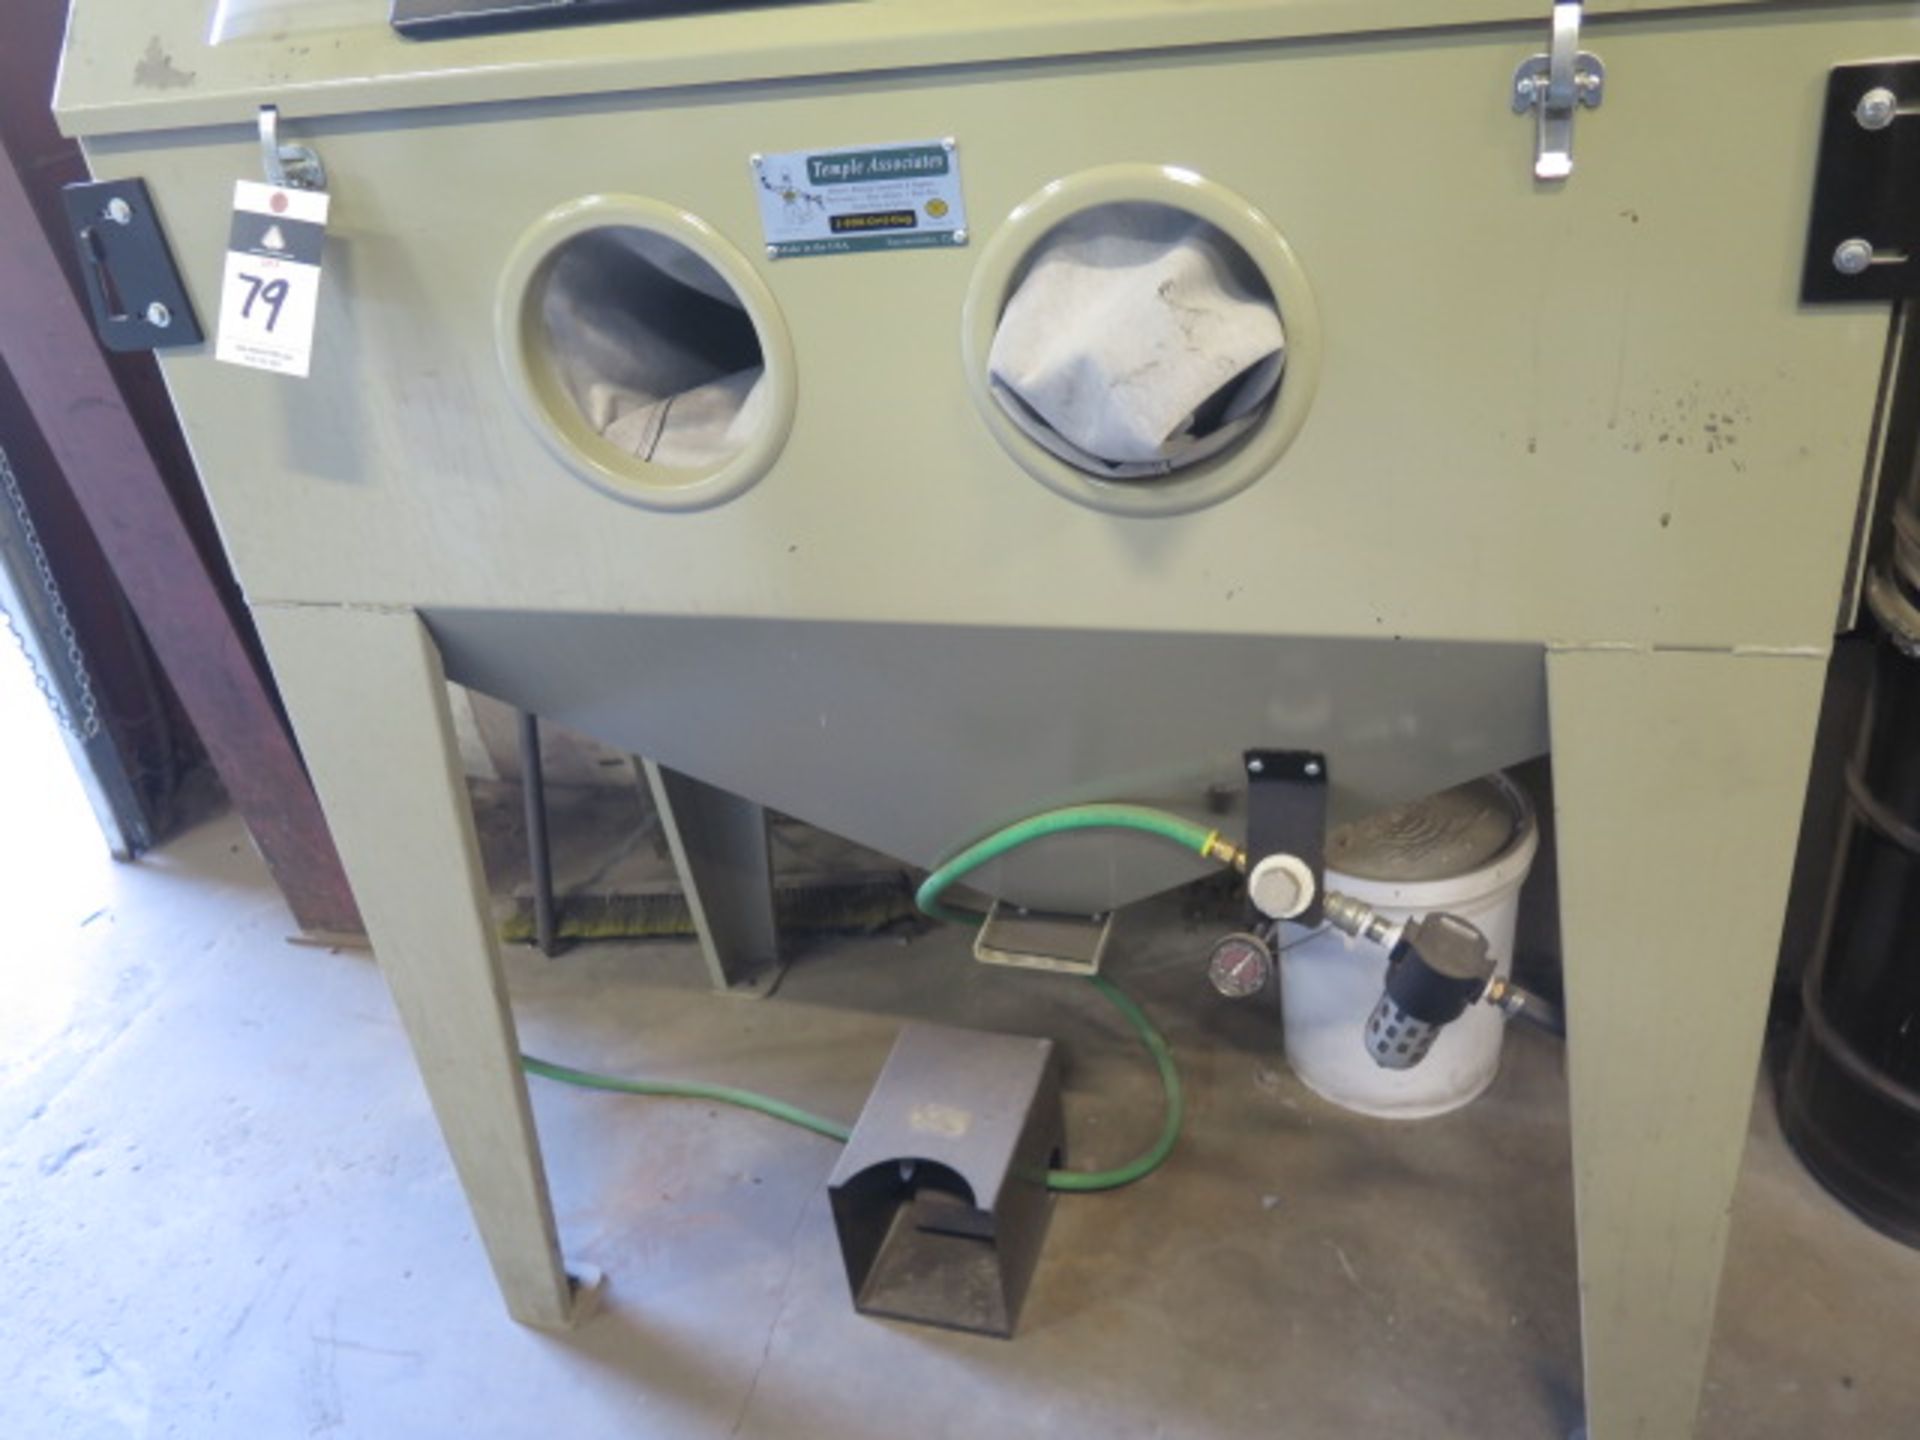 Temple Associates 24" x 48" Dry Blast Cabinet w/ Dust Collector - Image 4 of 6